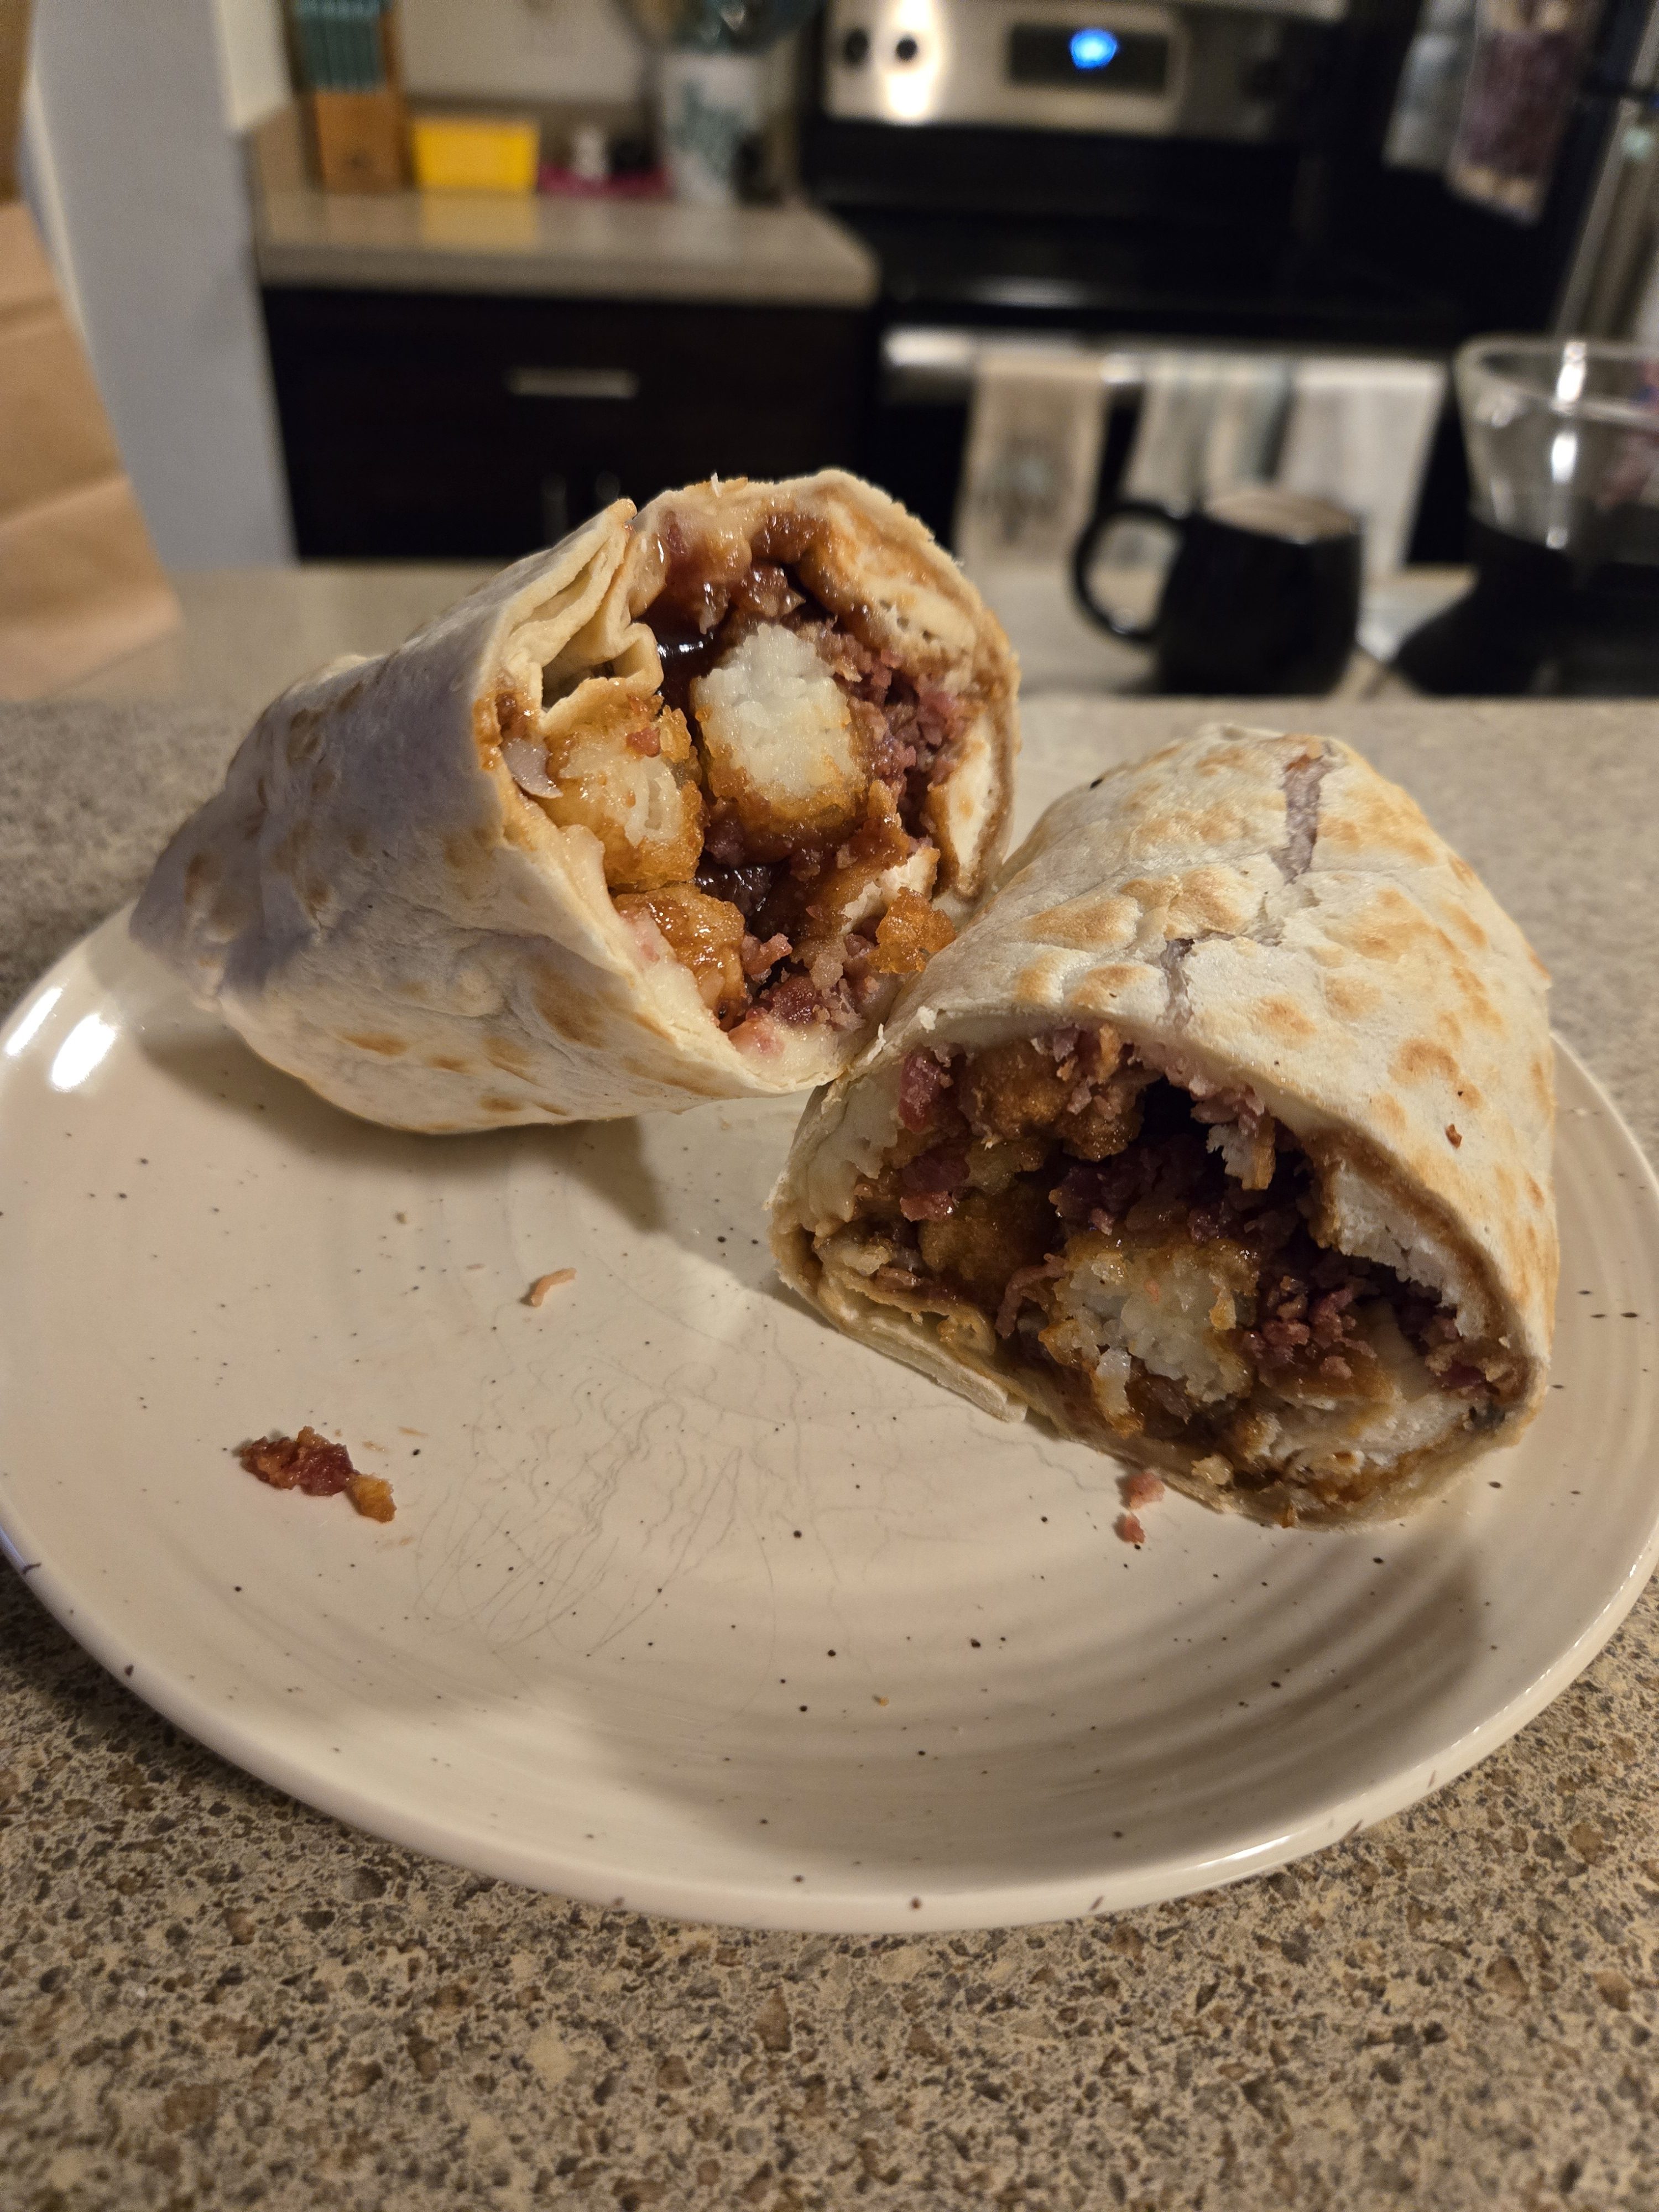 A photo of a wrap with tater tots and chicken tenders.